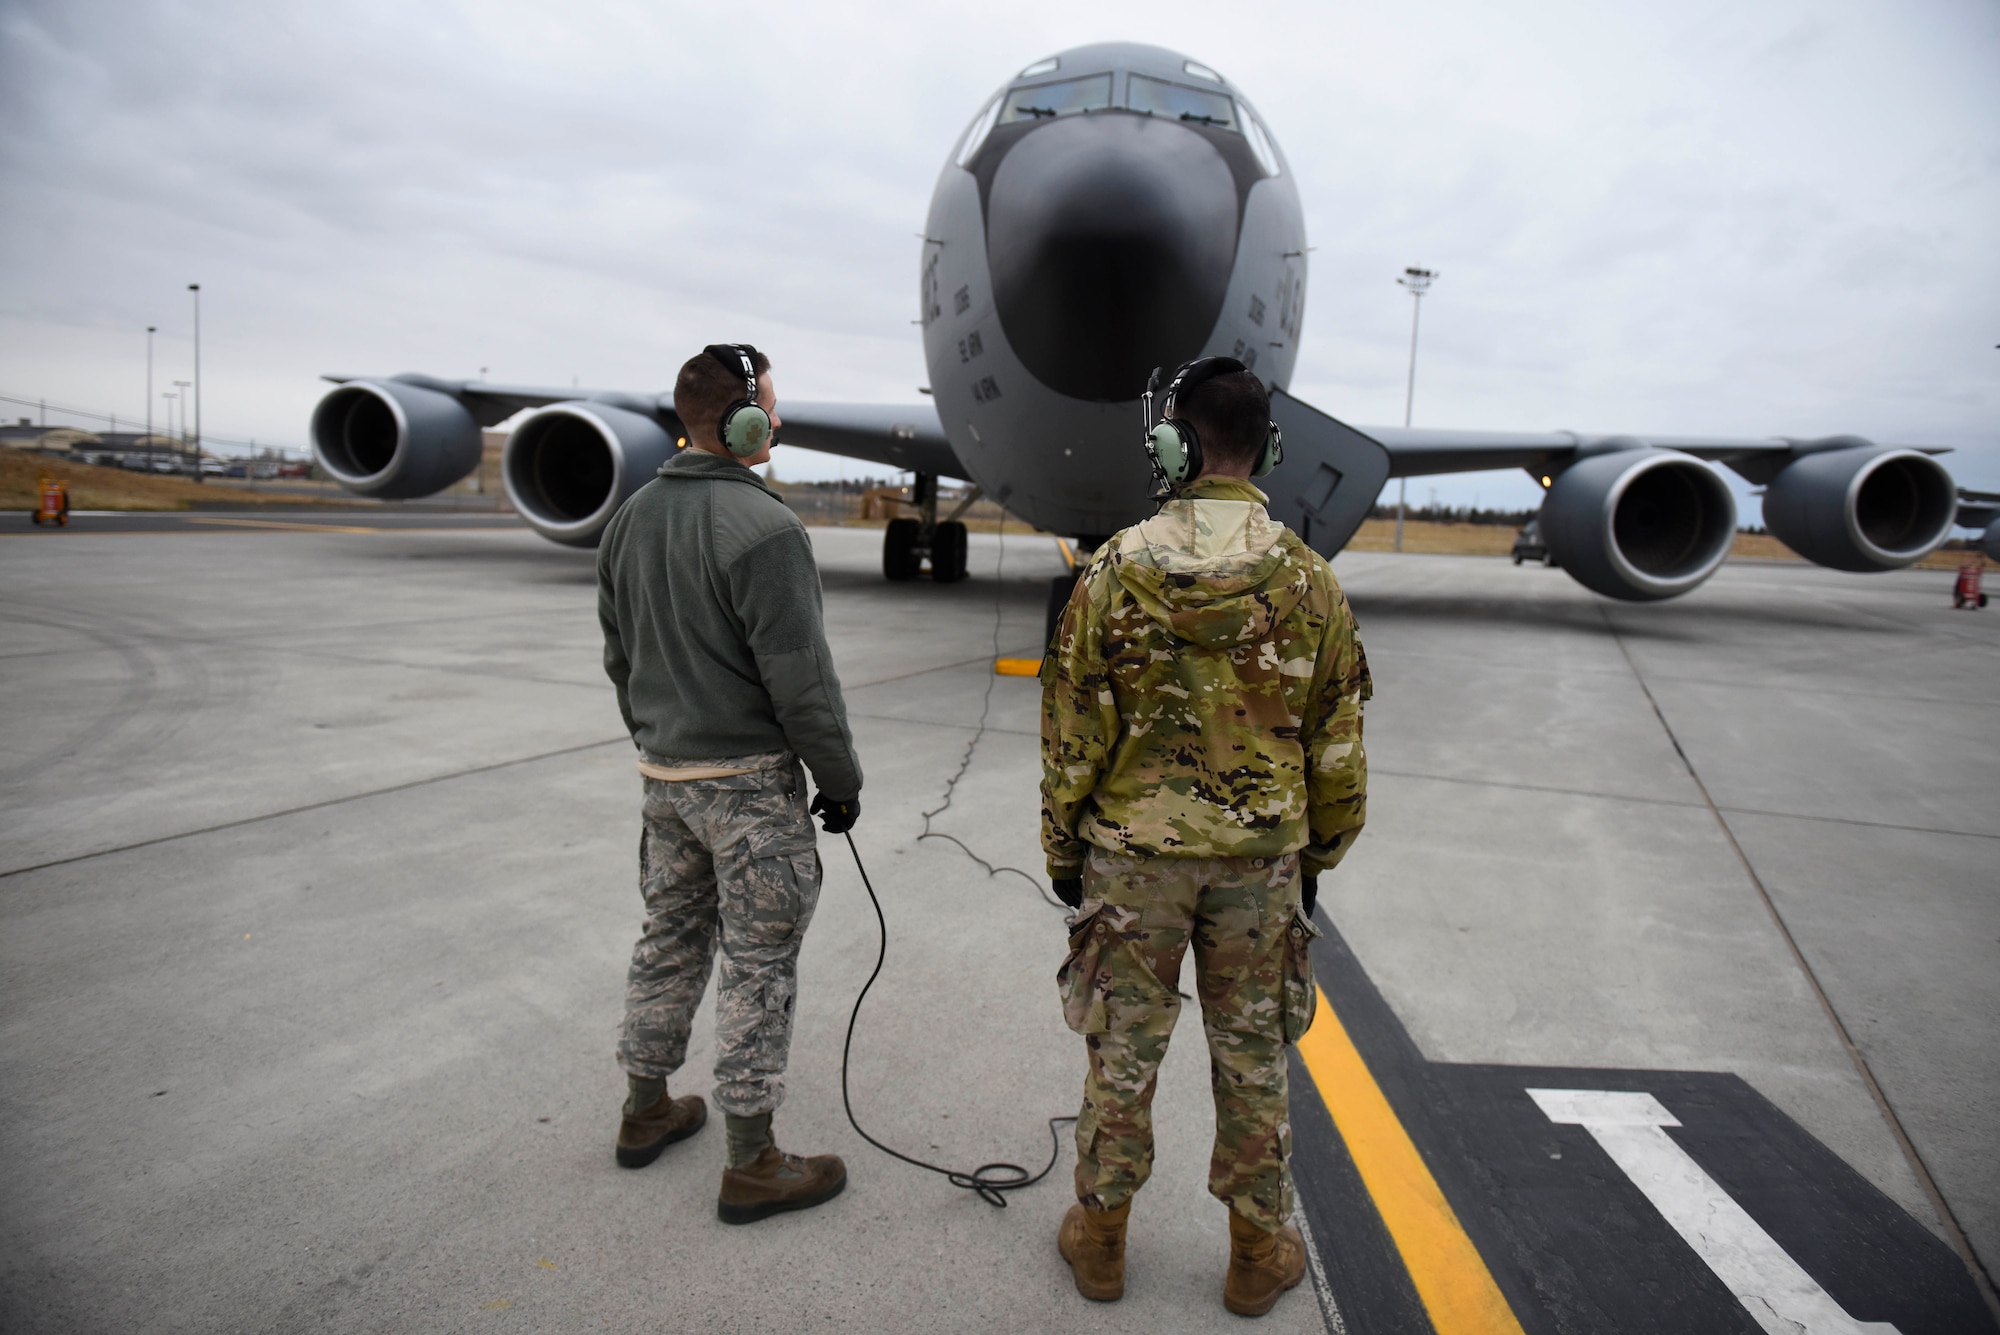 Staff Sgt. Austin Garcia and Senior Airman Dan O'Connor, 92nd Aircraft Maintenance Squadron crew chiefs supervise pre-flight checks during Exercise Global Thunder 2019 at Fairchild Air Force Base, Washington, November 2018. Global Thunder is a U.S. Strategic Command exercise designed to ensure an efficient mission response by testing Airmen's ability to execute command, control and operational procedures during simulated combat scenarios. (U.S. Air Force photo/Airman 1st Class Lawrence Sena)